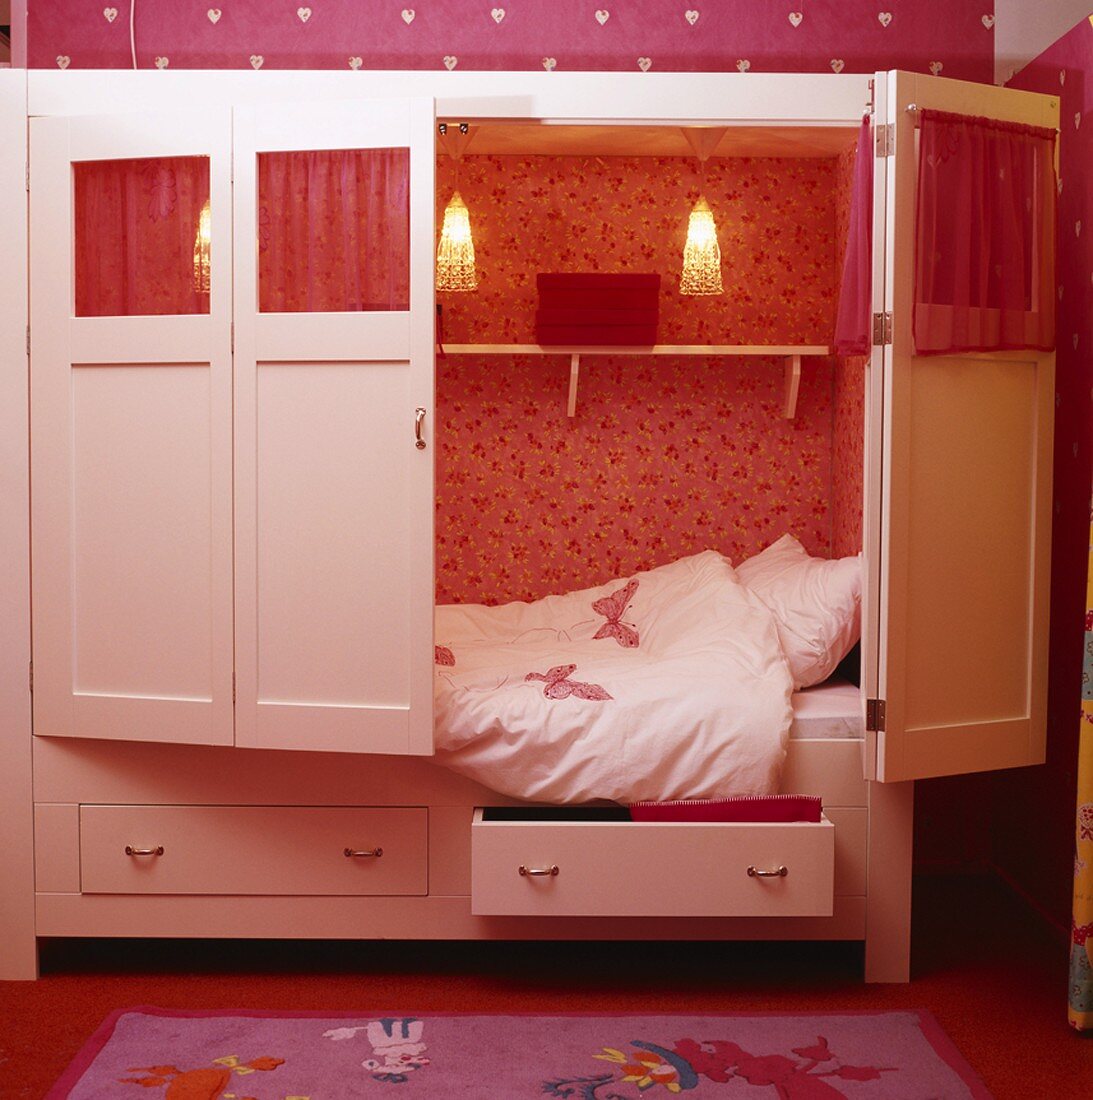 Alcove-style cupboard bed with butterfly motif in child's bedroom